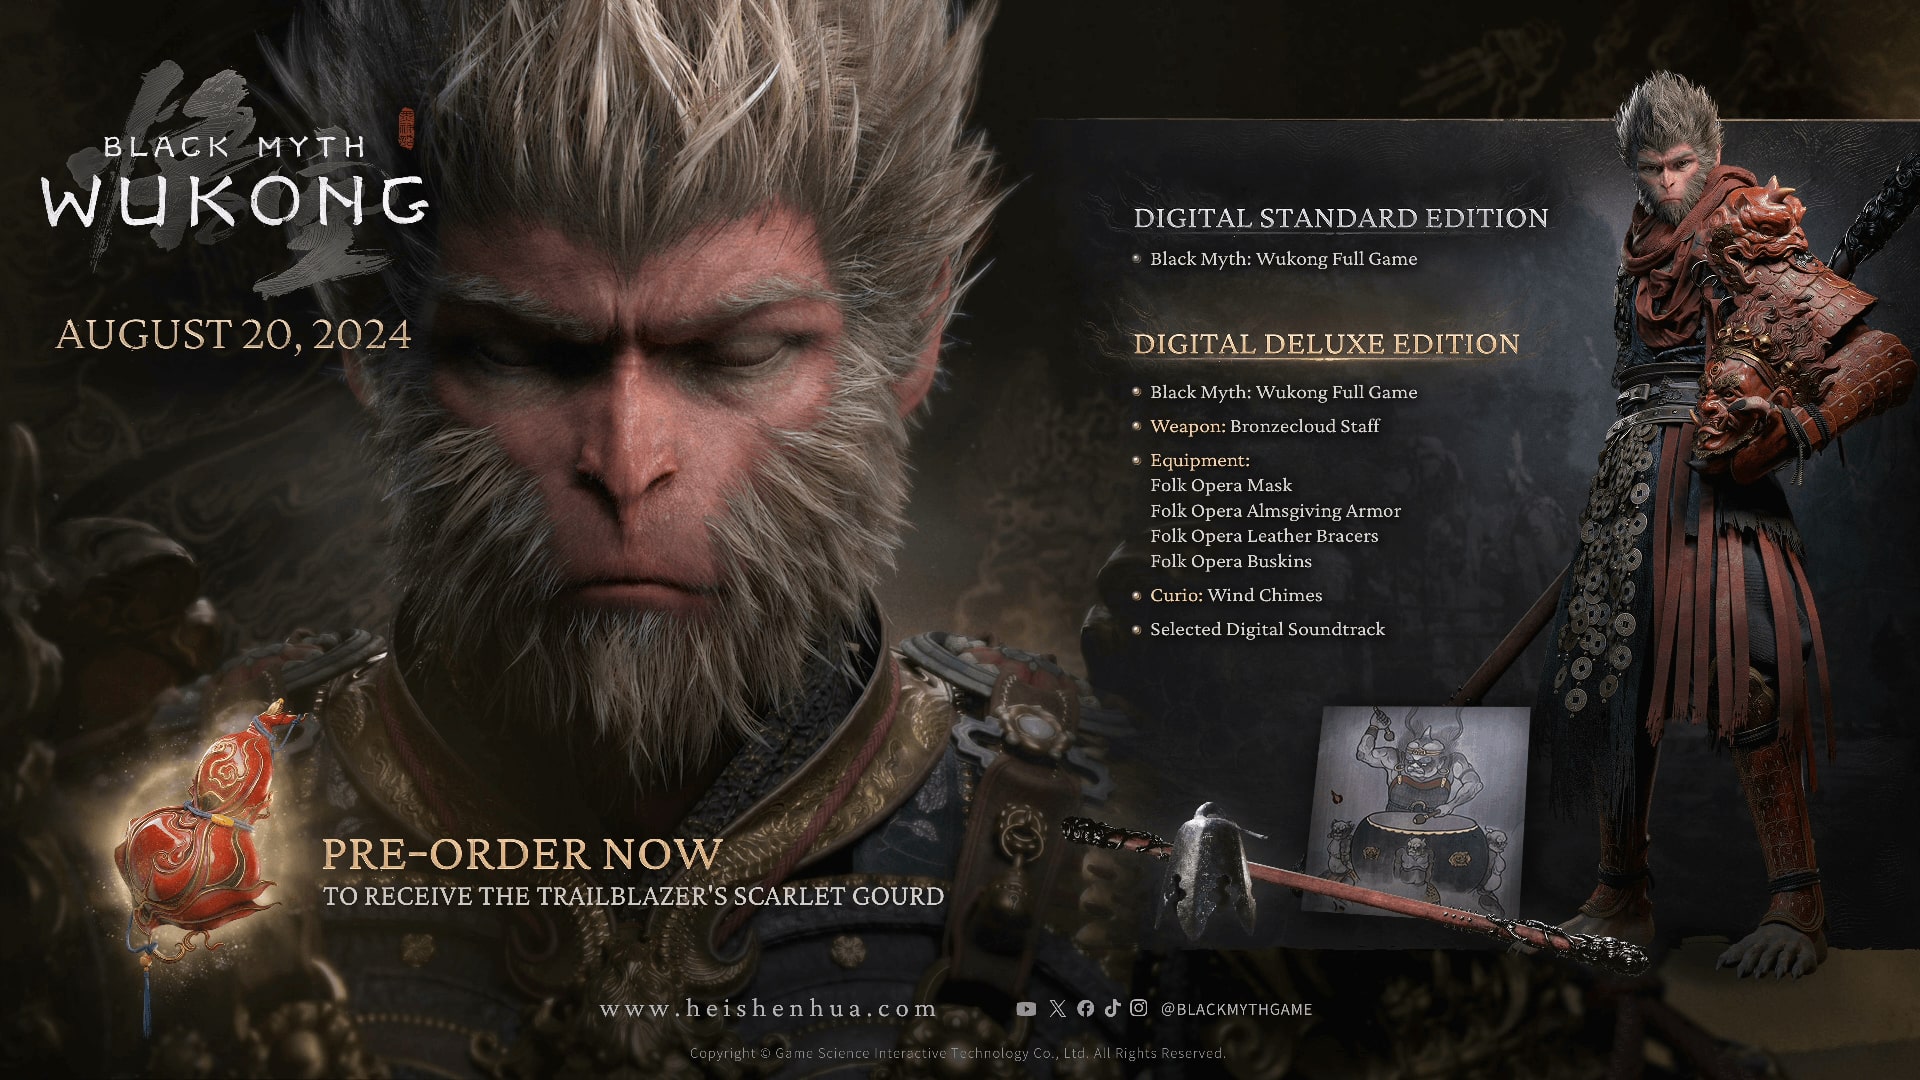 Screenshot from Black Myth: Wukong showing the release date and platforms information